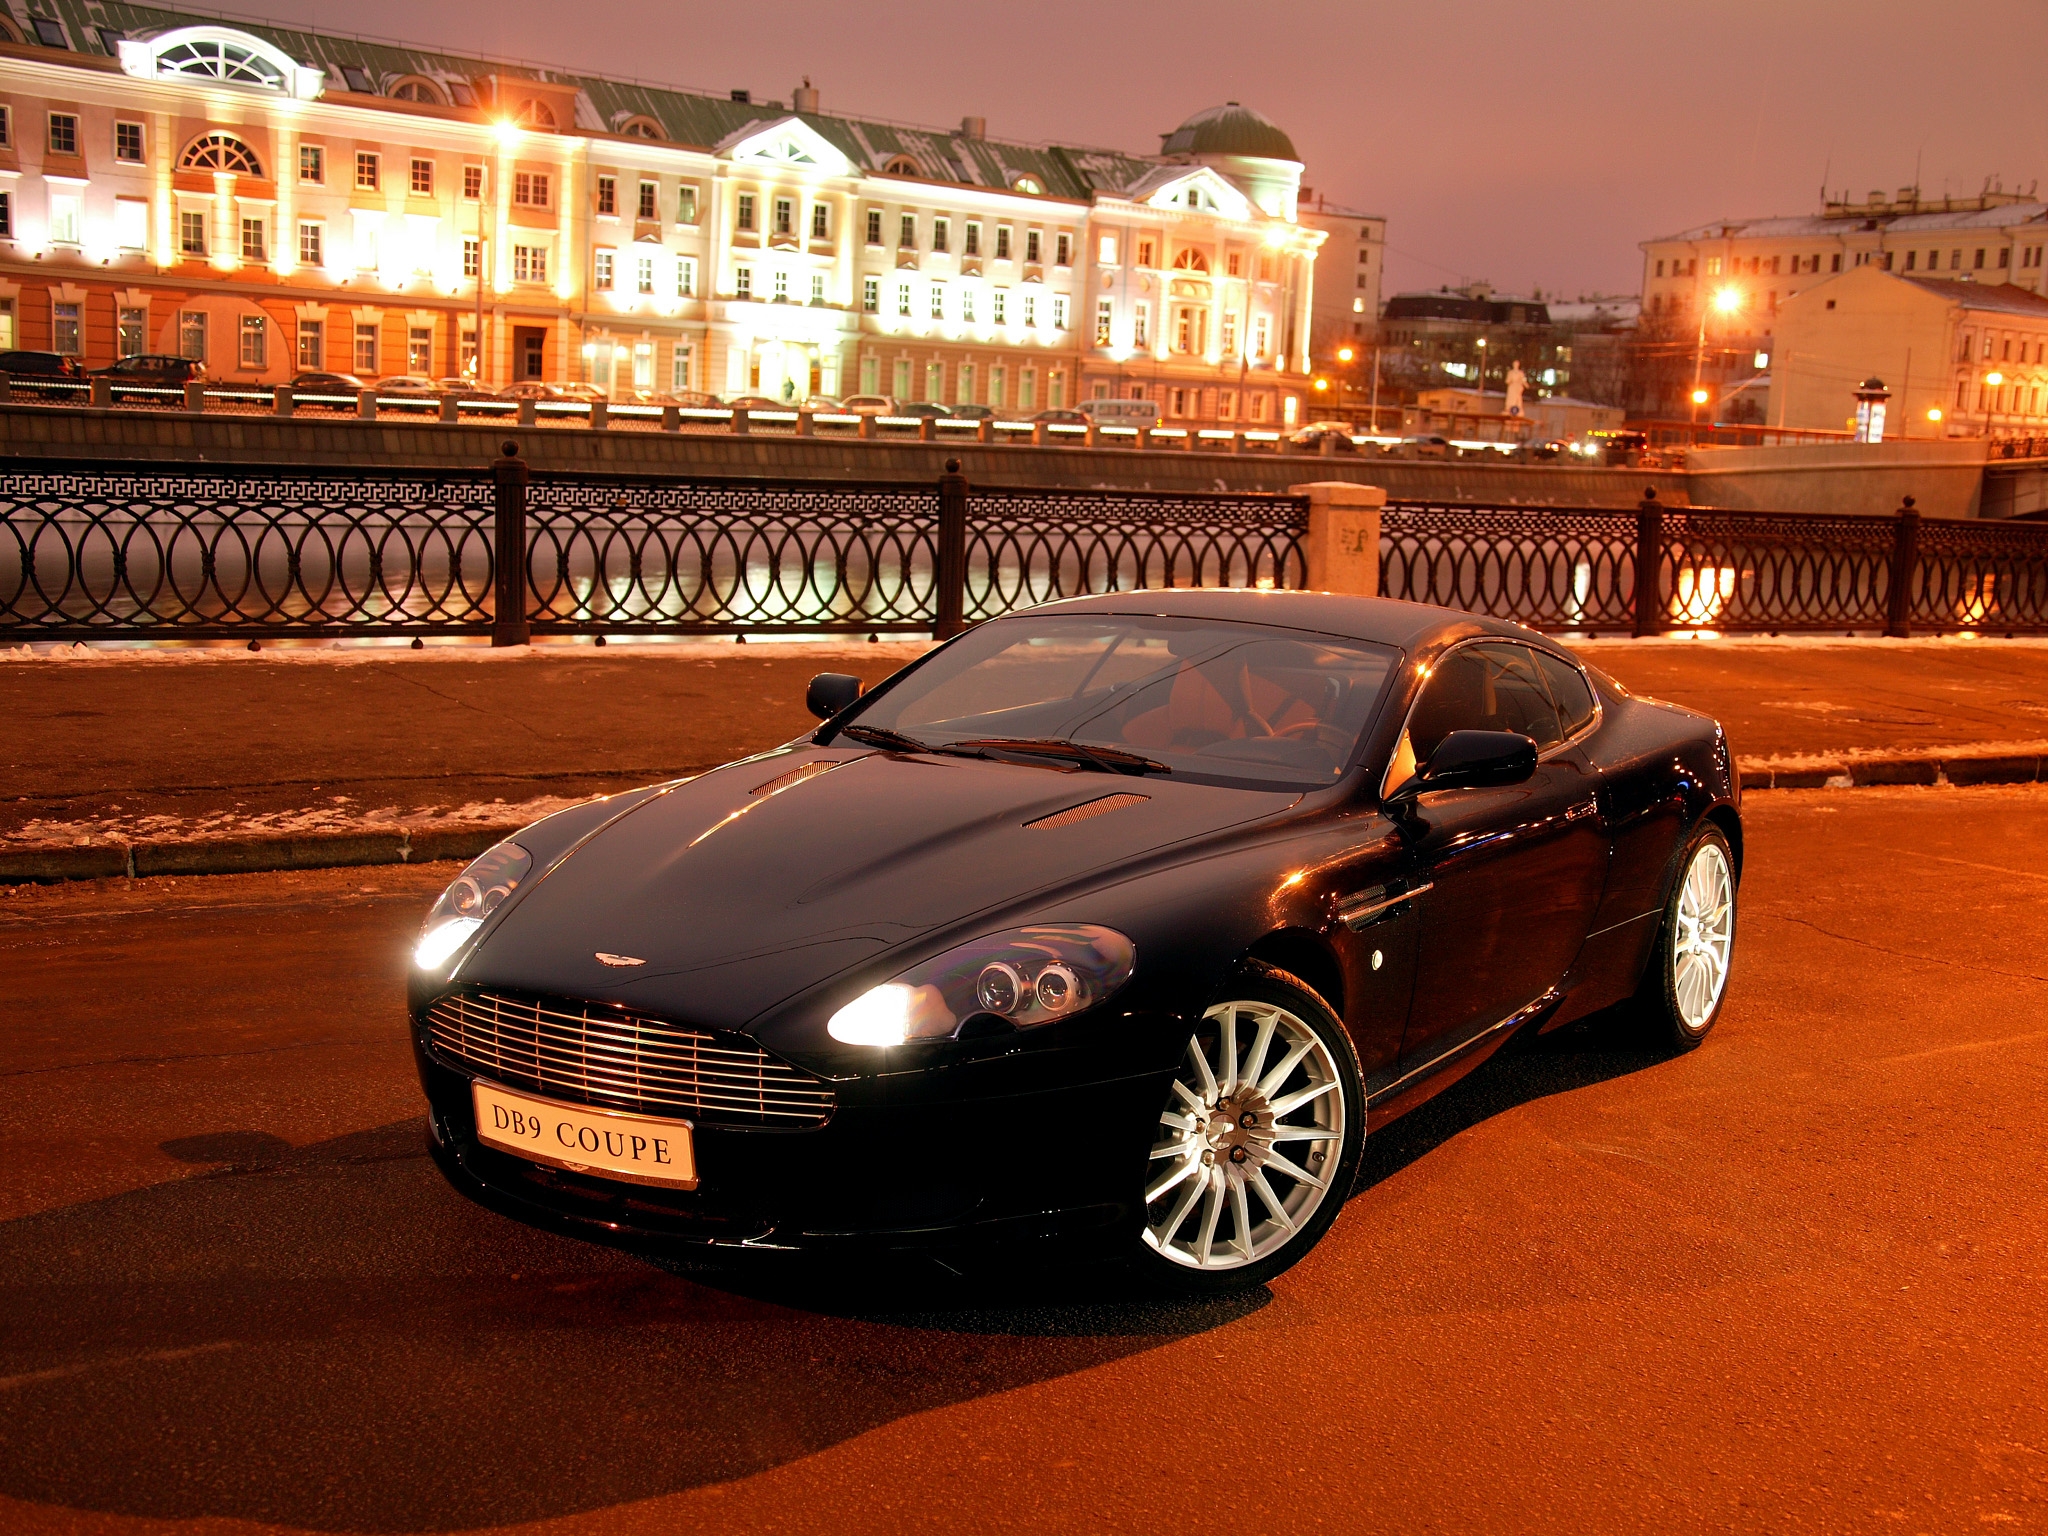 aston martin, houses, black, auto, cars, city, lights, asphalt, front view, style, 2004, db9 Smartphone Background